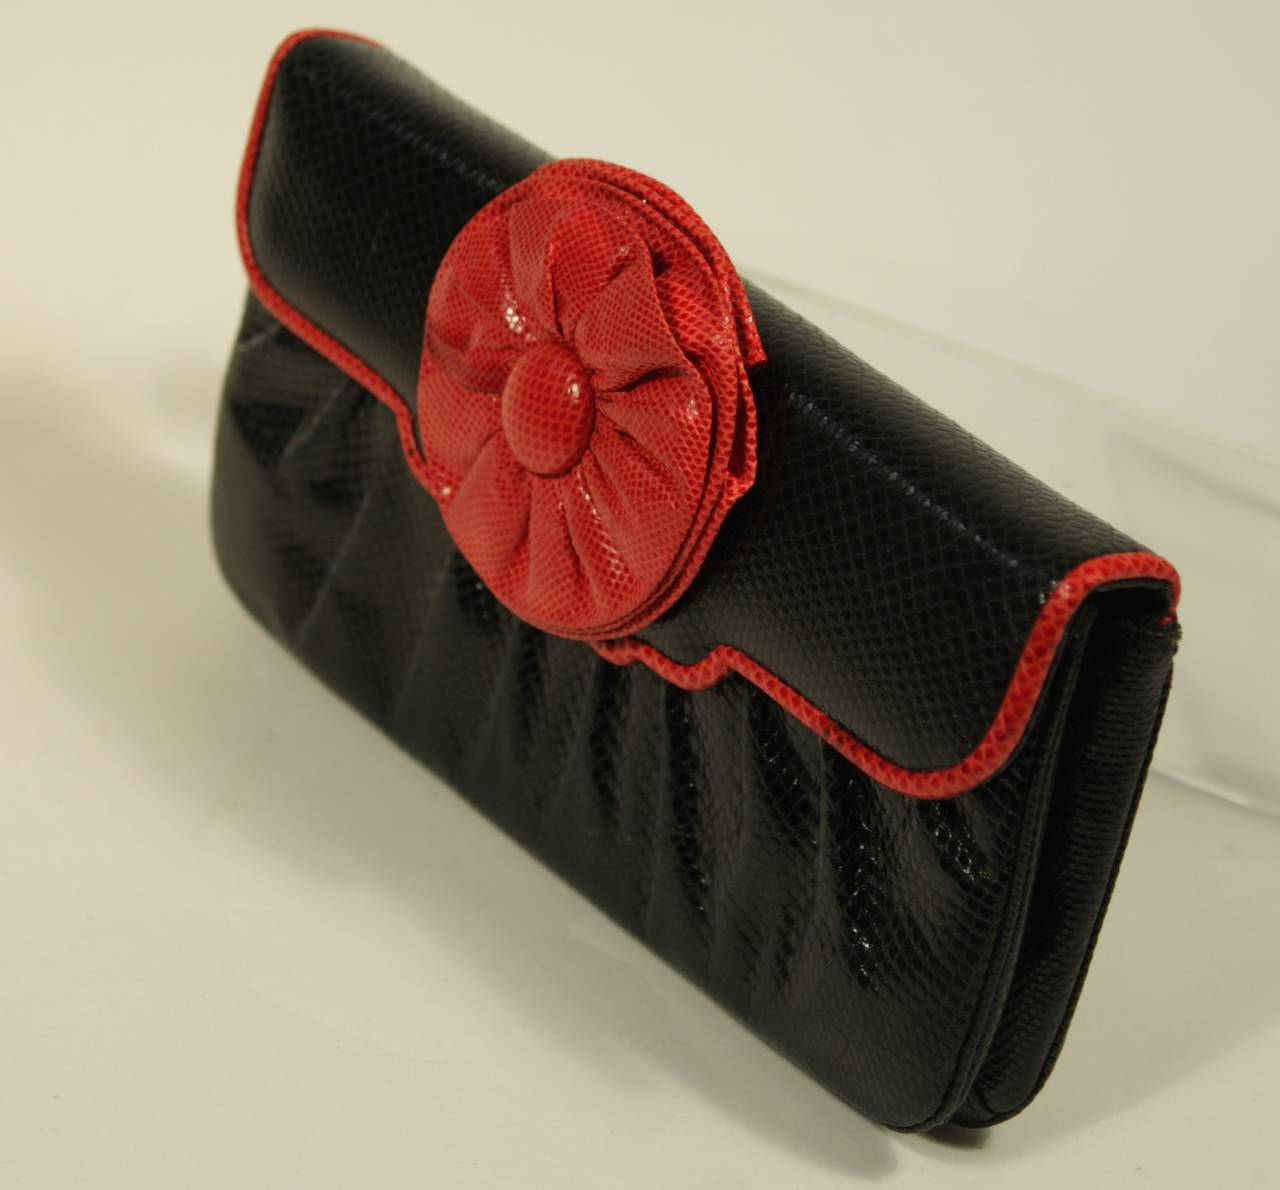 This Judith Leiber design is available for viewing at our Beverly Hills Boutique. The clutch is composed of a black snakeskin trimmed with red. There is a ruffle flower detail and magnetic snap closure. The silk interior is in pristine condition and